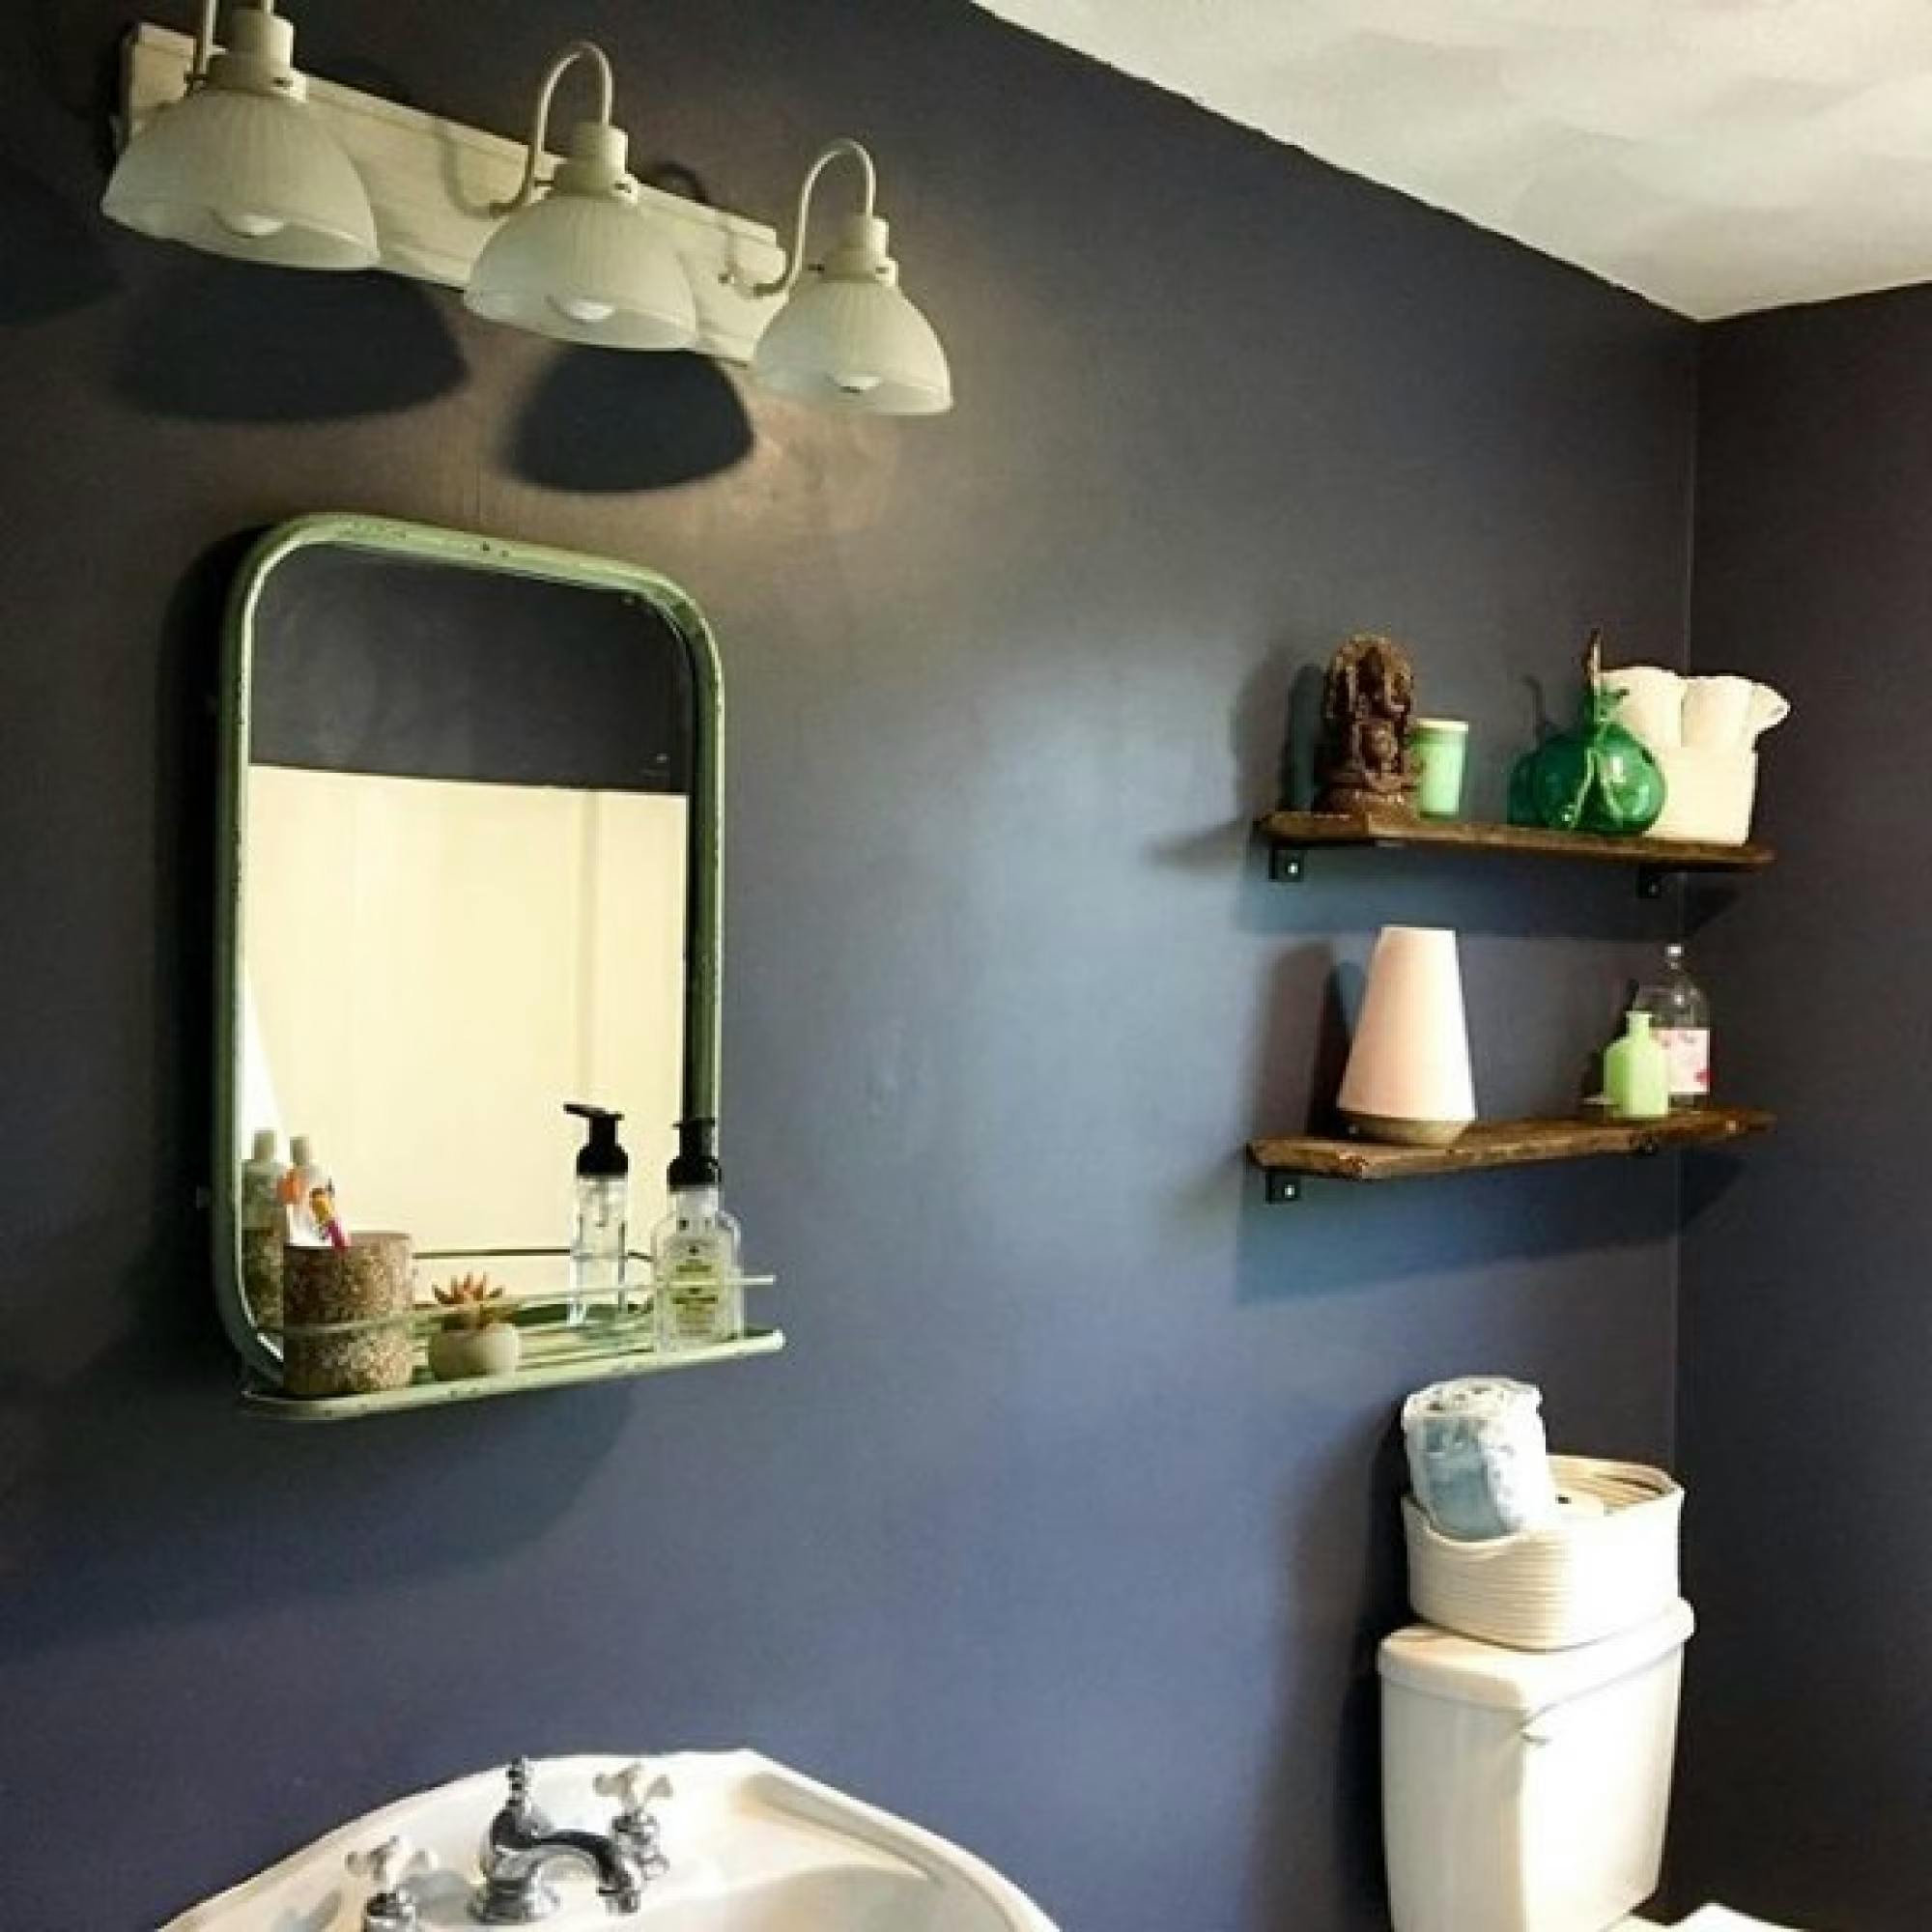 @mandakate82 used Sherwin-Williams Mineral Gray (SW 2740) to paint their bathroom.